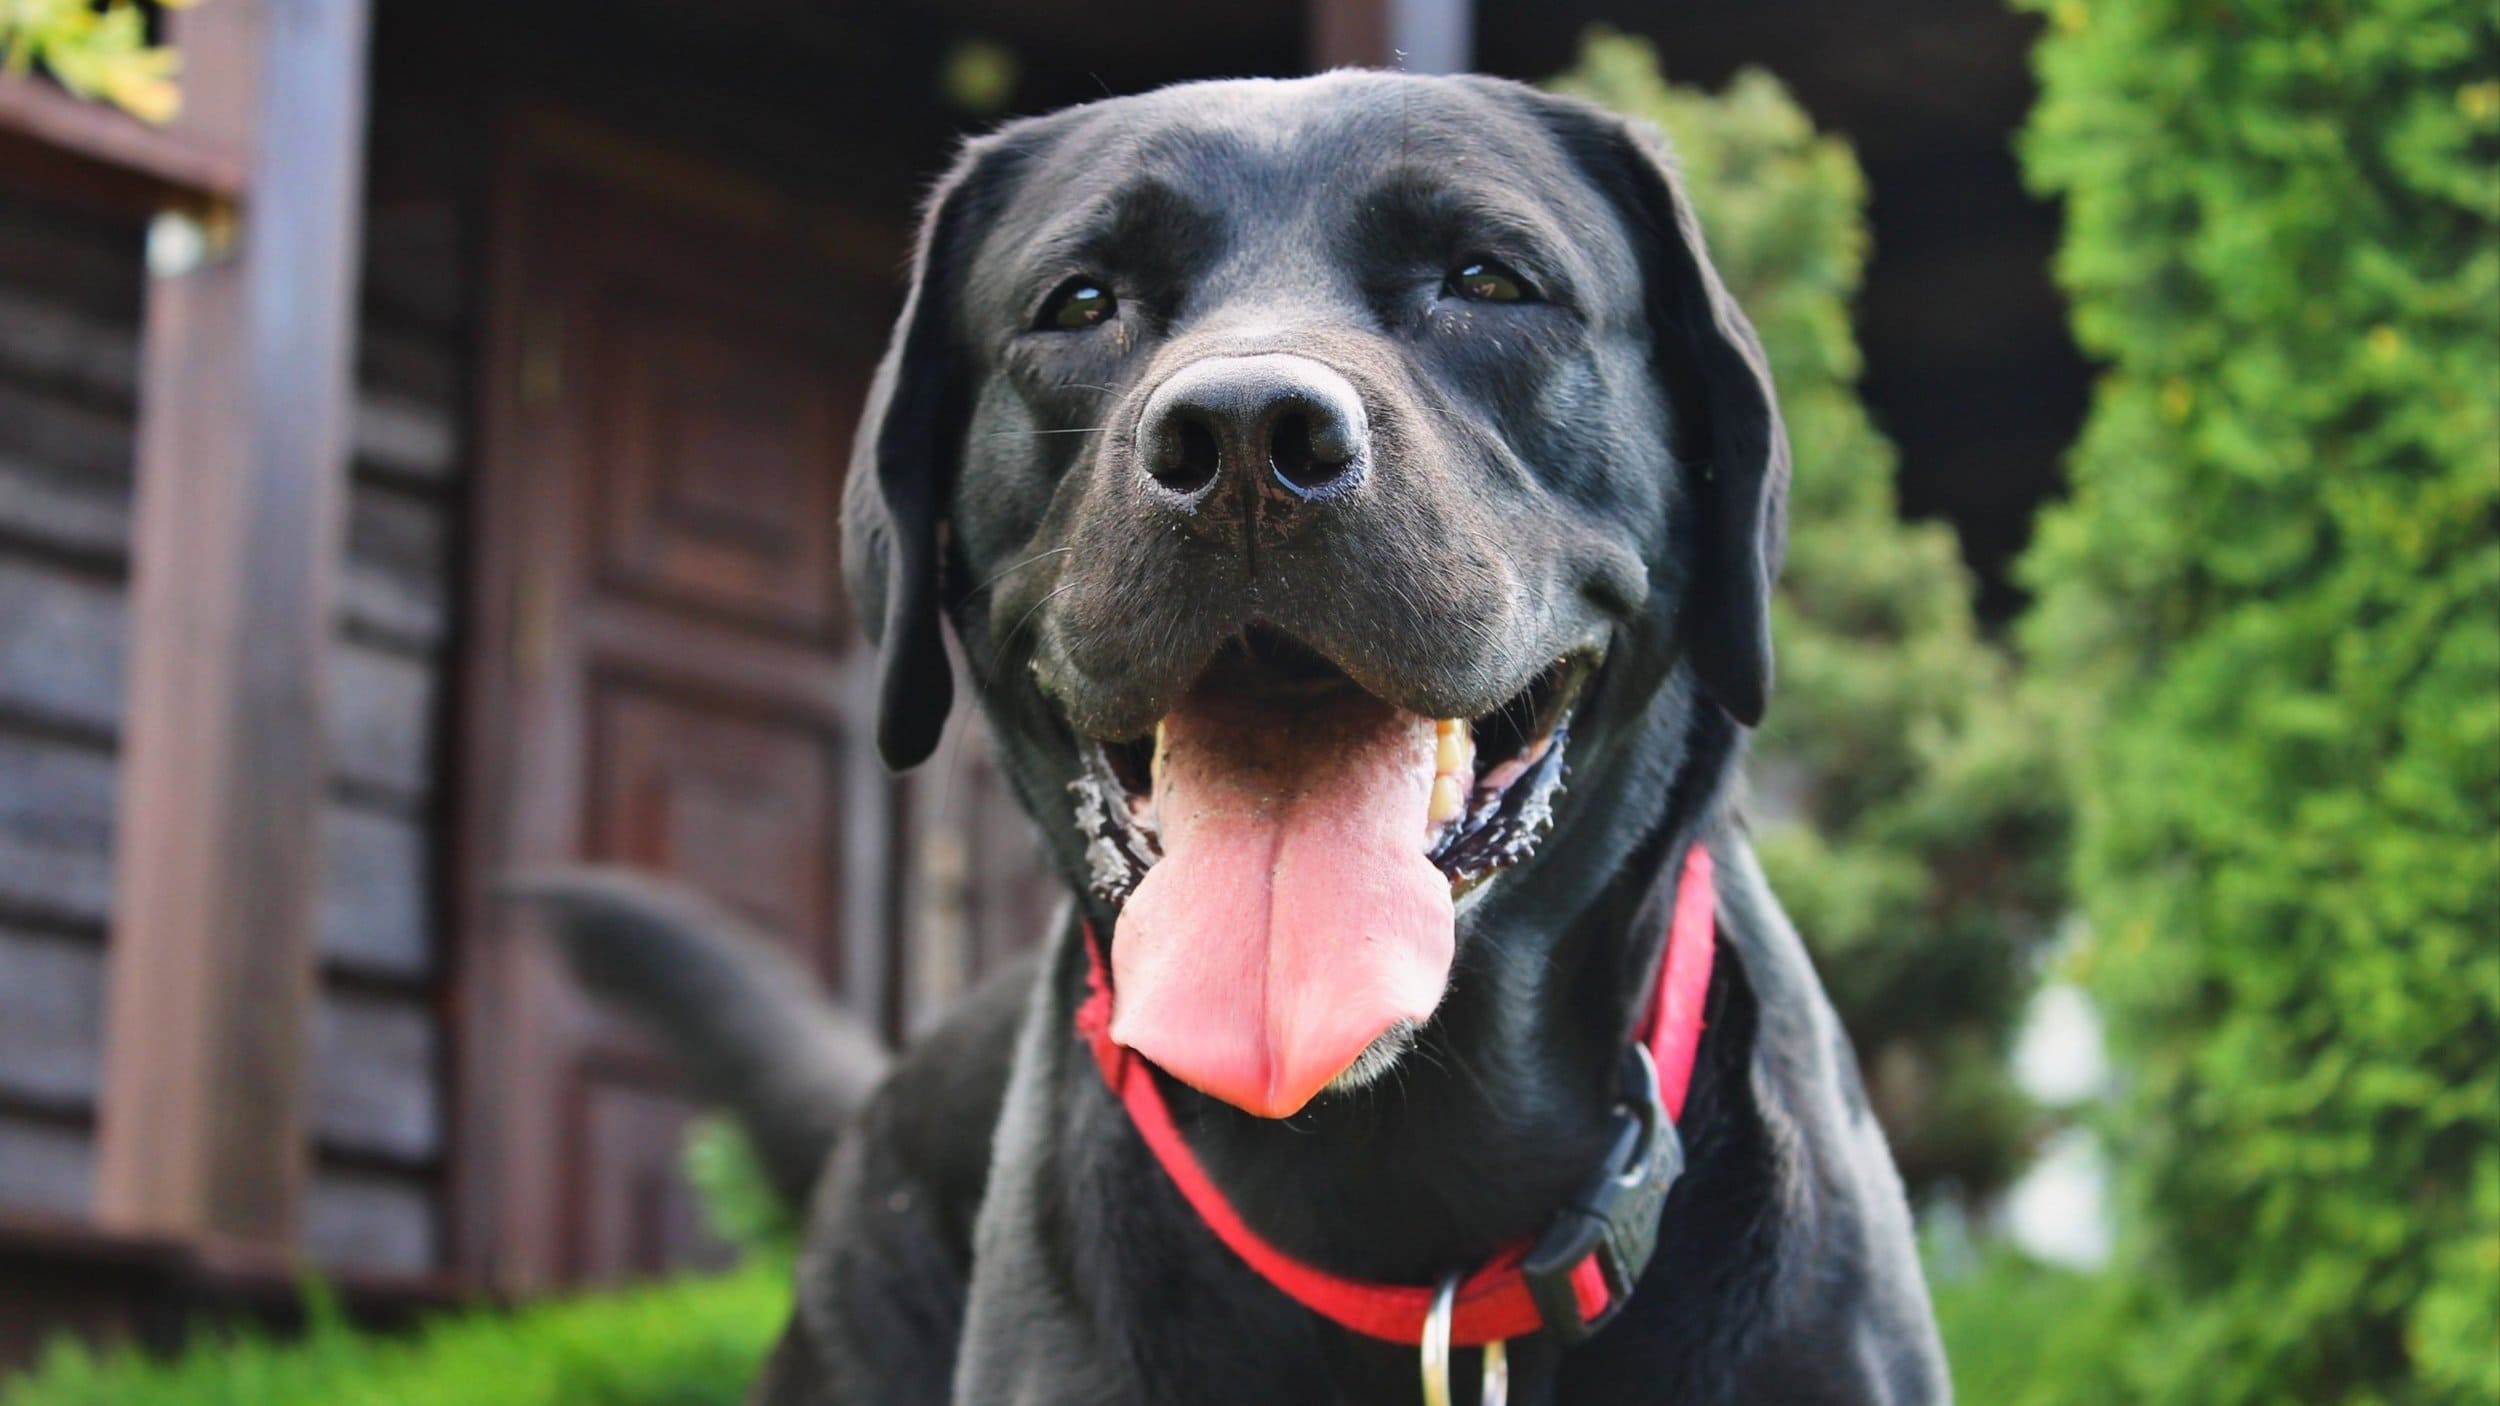 Black lab with tongue out wearing red collar